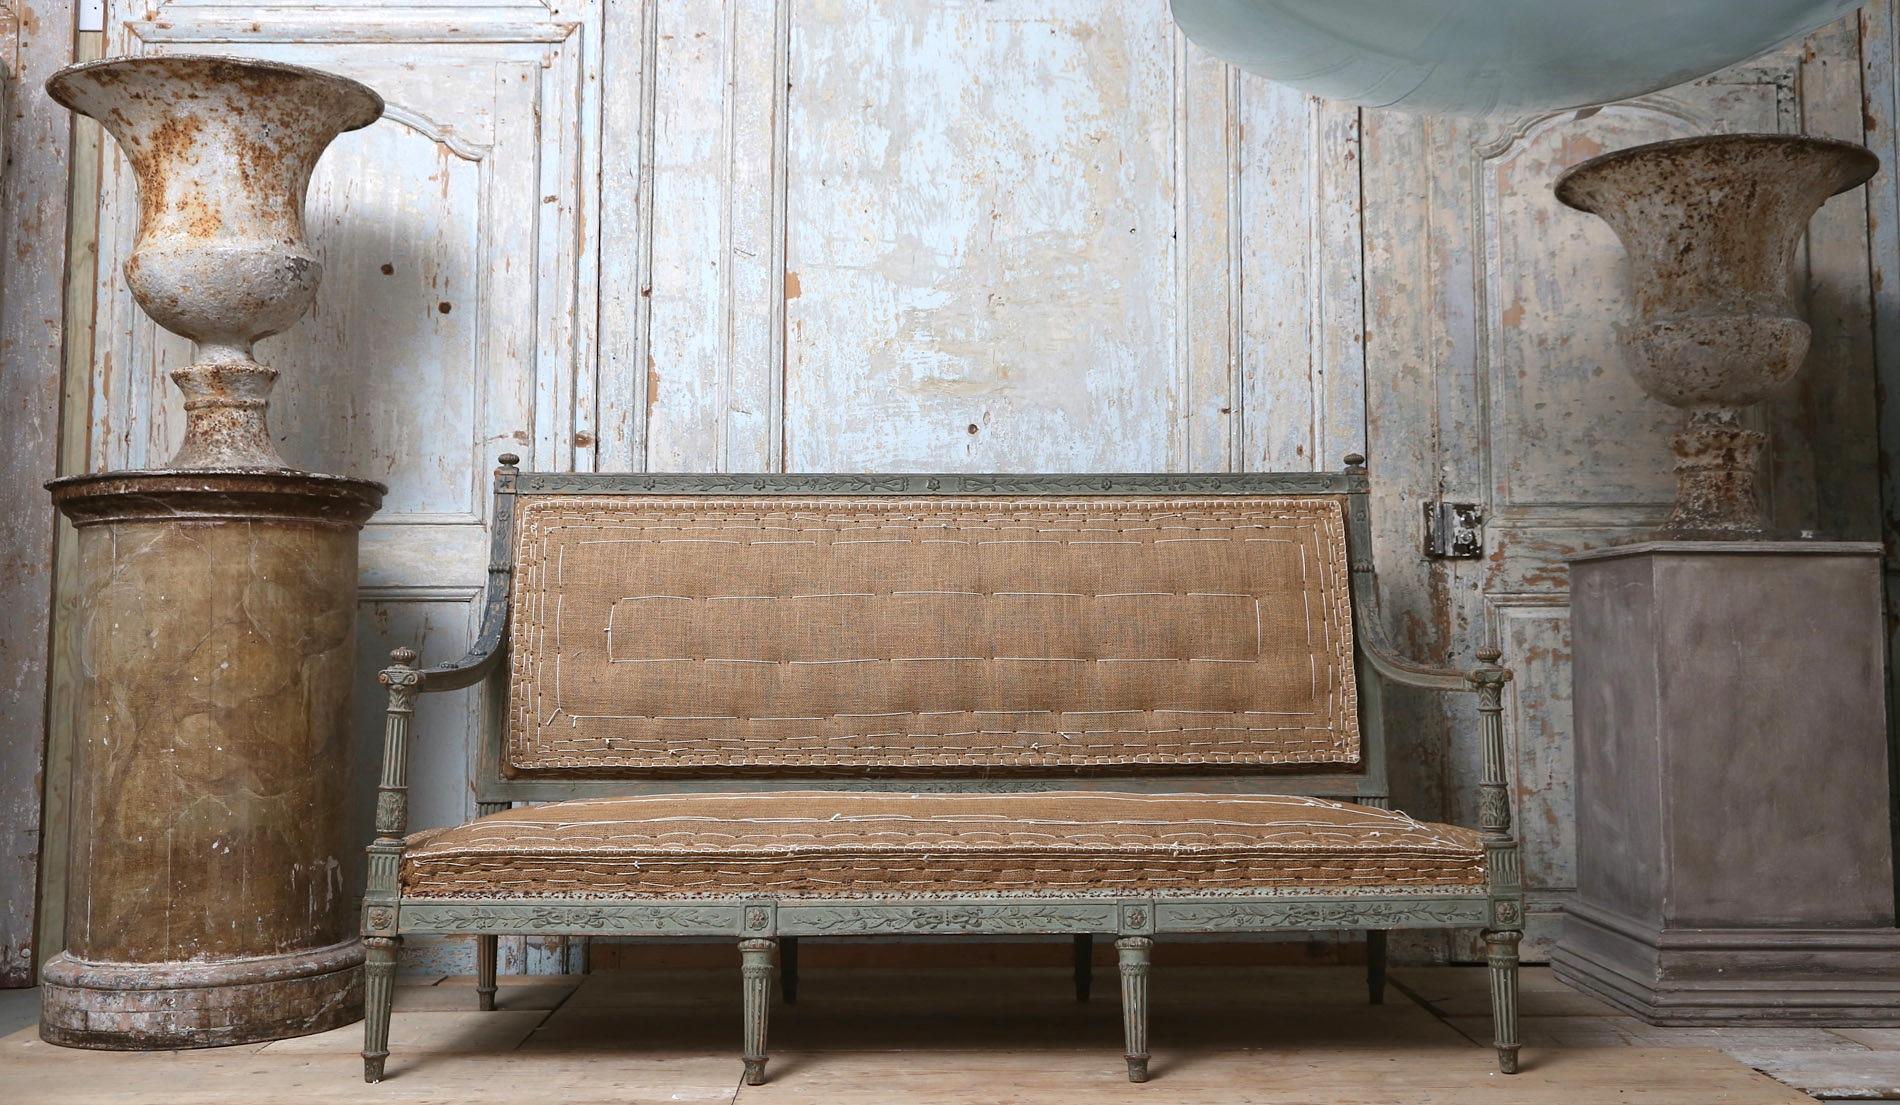 A wonderful example of a late 18th century French Directoire sofa / canapé with detailed carving and original paintwork
It has been upholstered using traditional French period upholstery technique methods finished in jute.